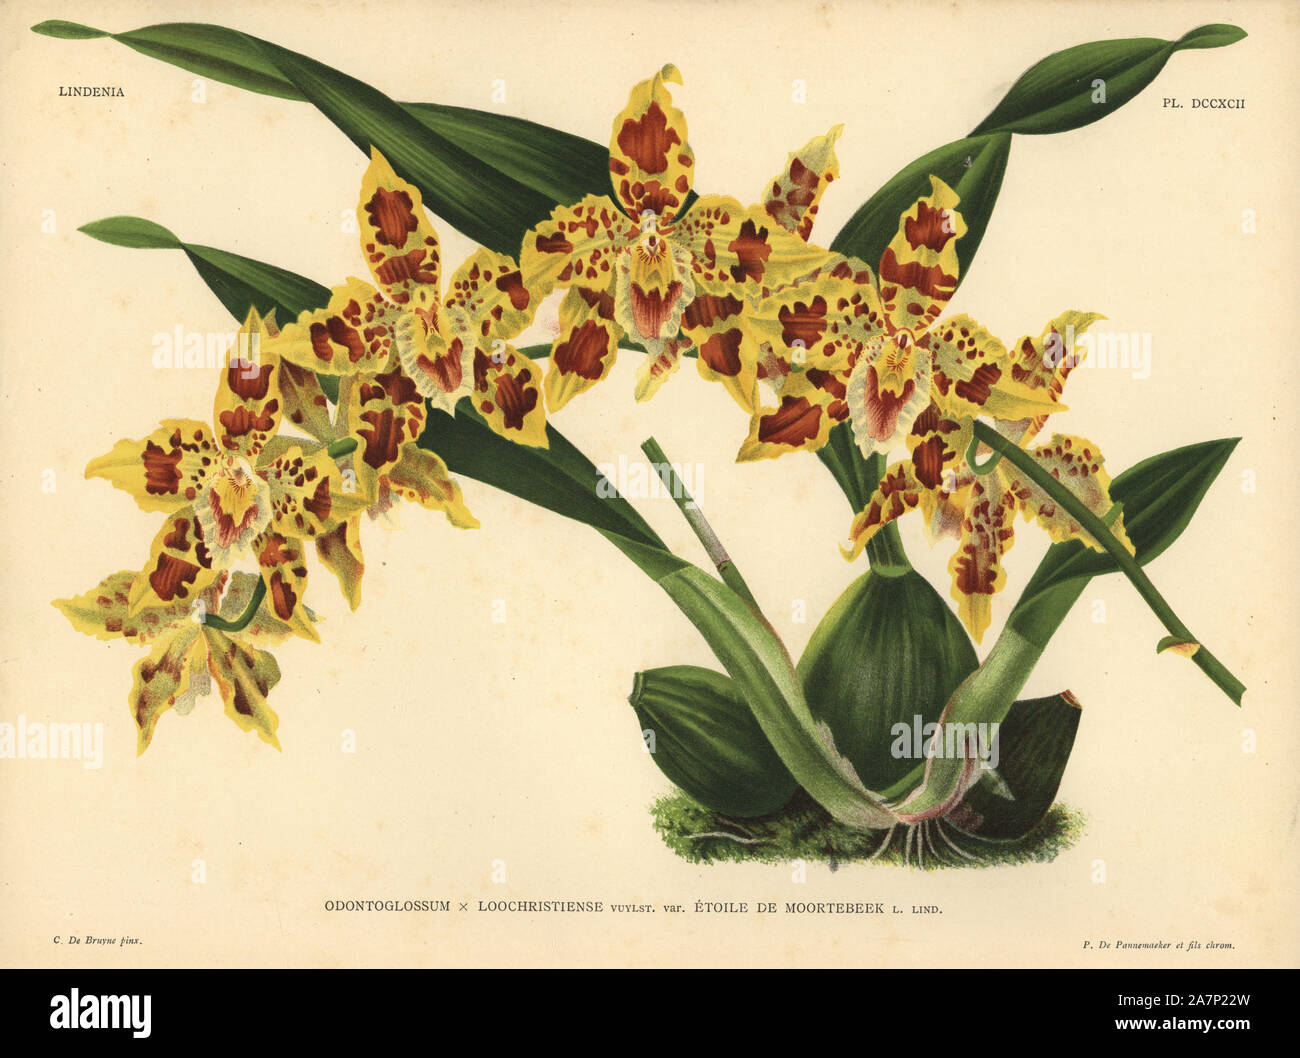 Etoile de Moortebeek variety of Odontoglossum x Loochristiense hybrid orchid. Illustration drawn by C. de Bruyne and chromolithographed by P. de Pannemaeker et fils from Lucien Linden's 'Lindenia, Iconographie des Orchidees,' Brussels, 1902. Stock Photo